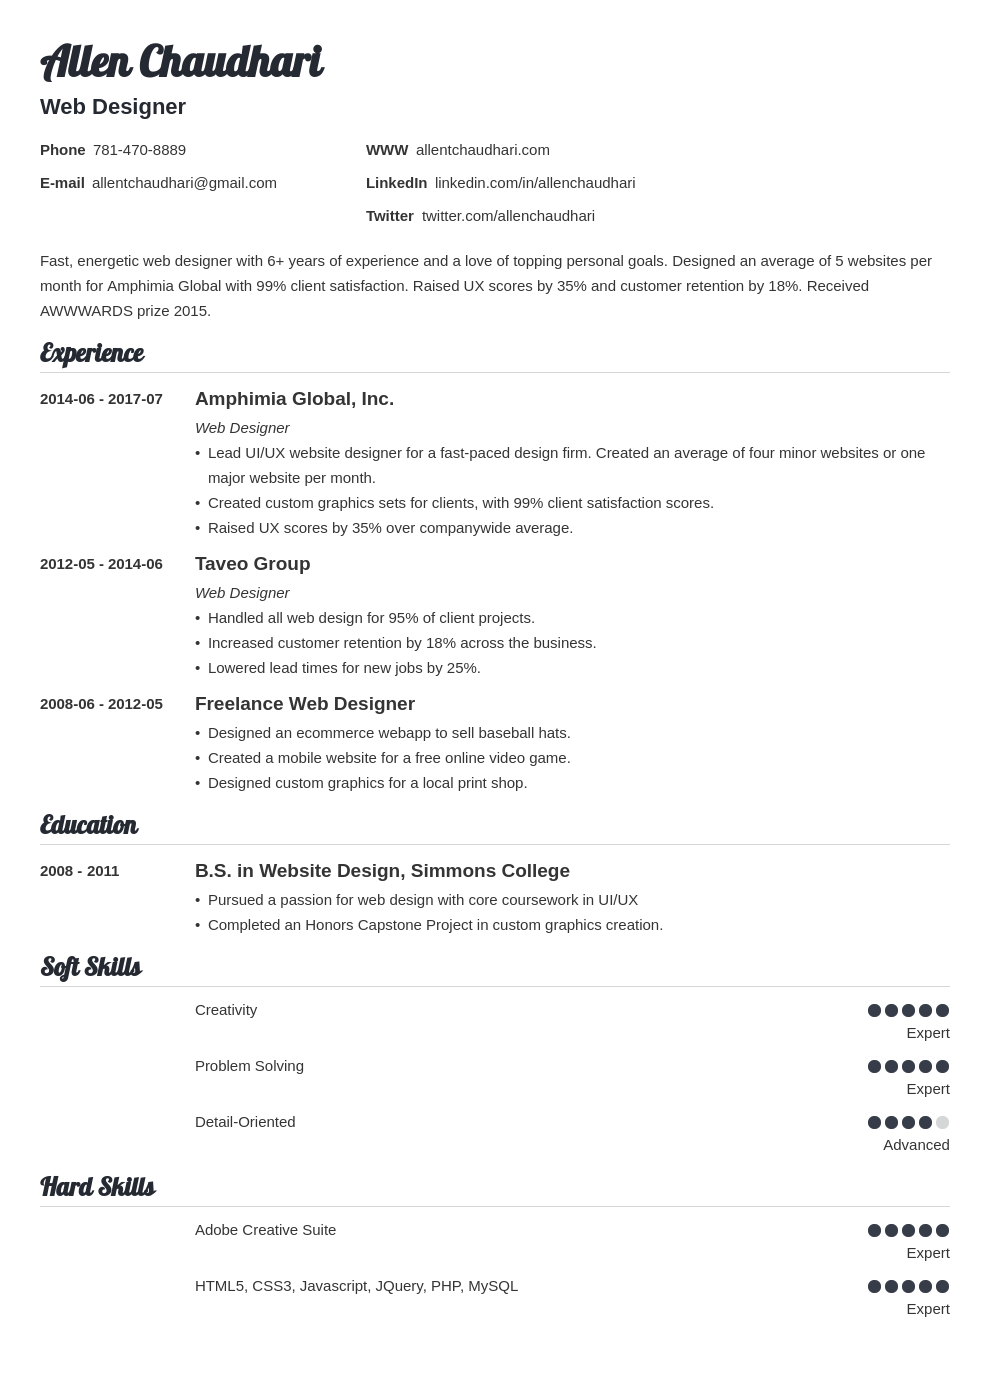 how to include capstone project in resume